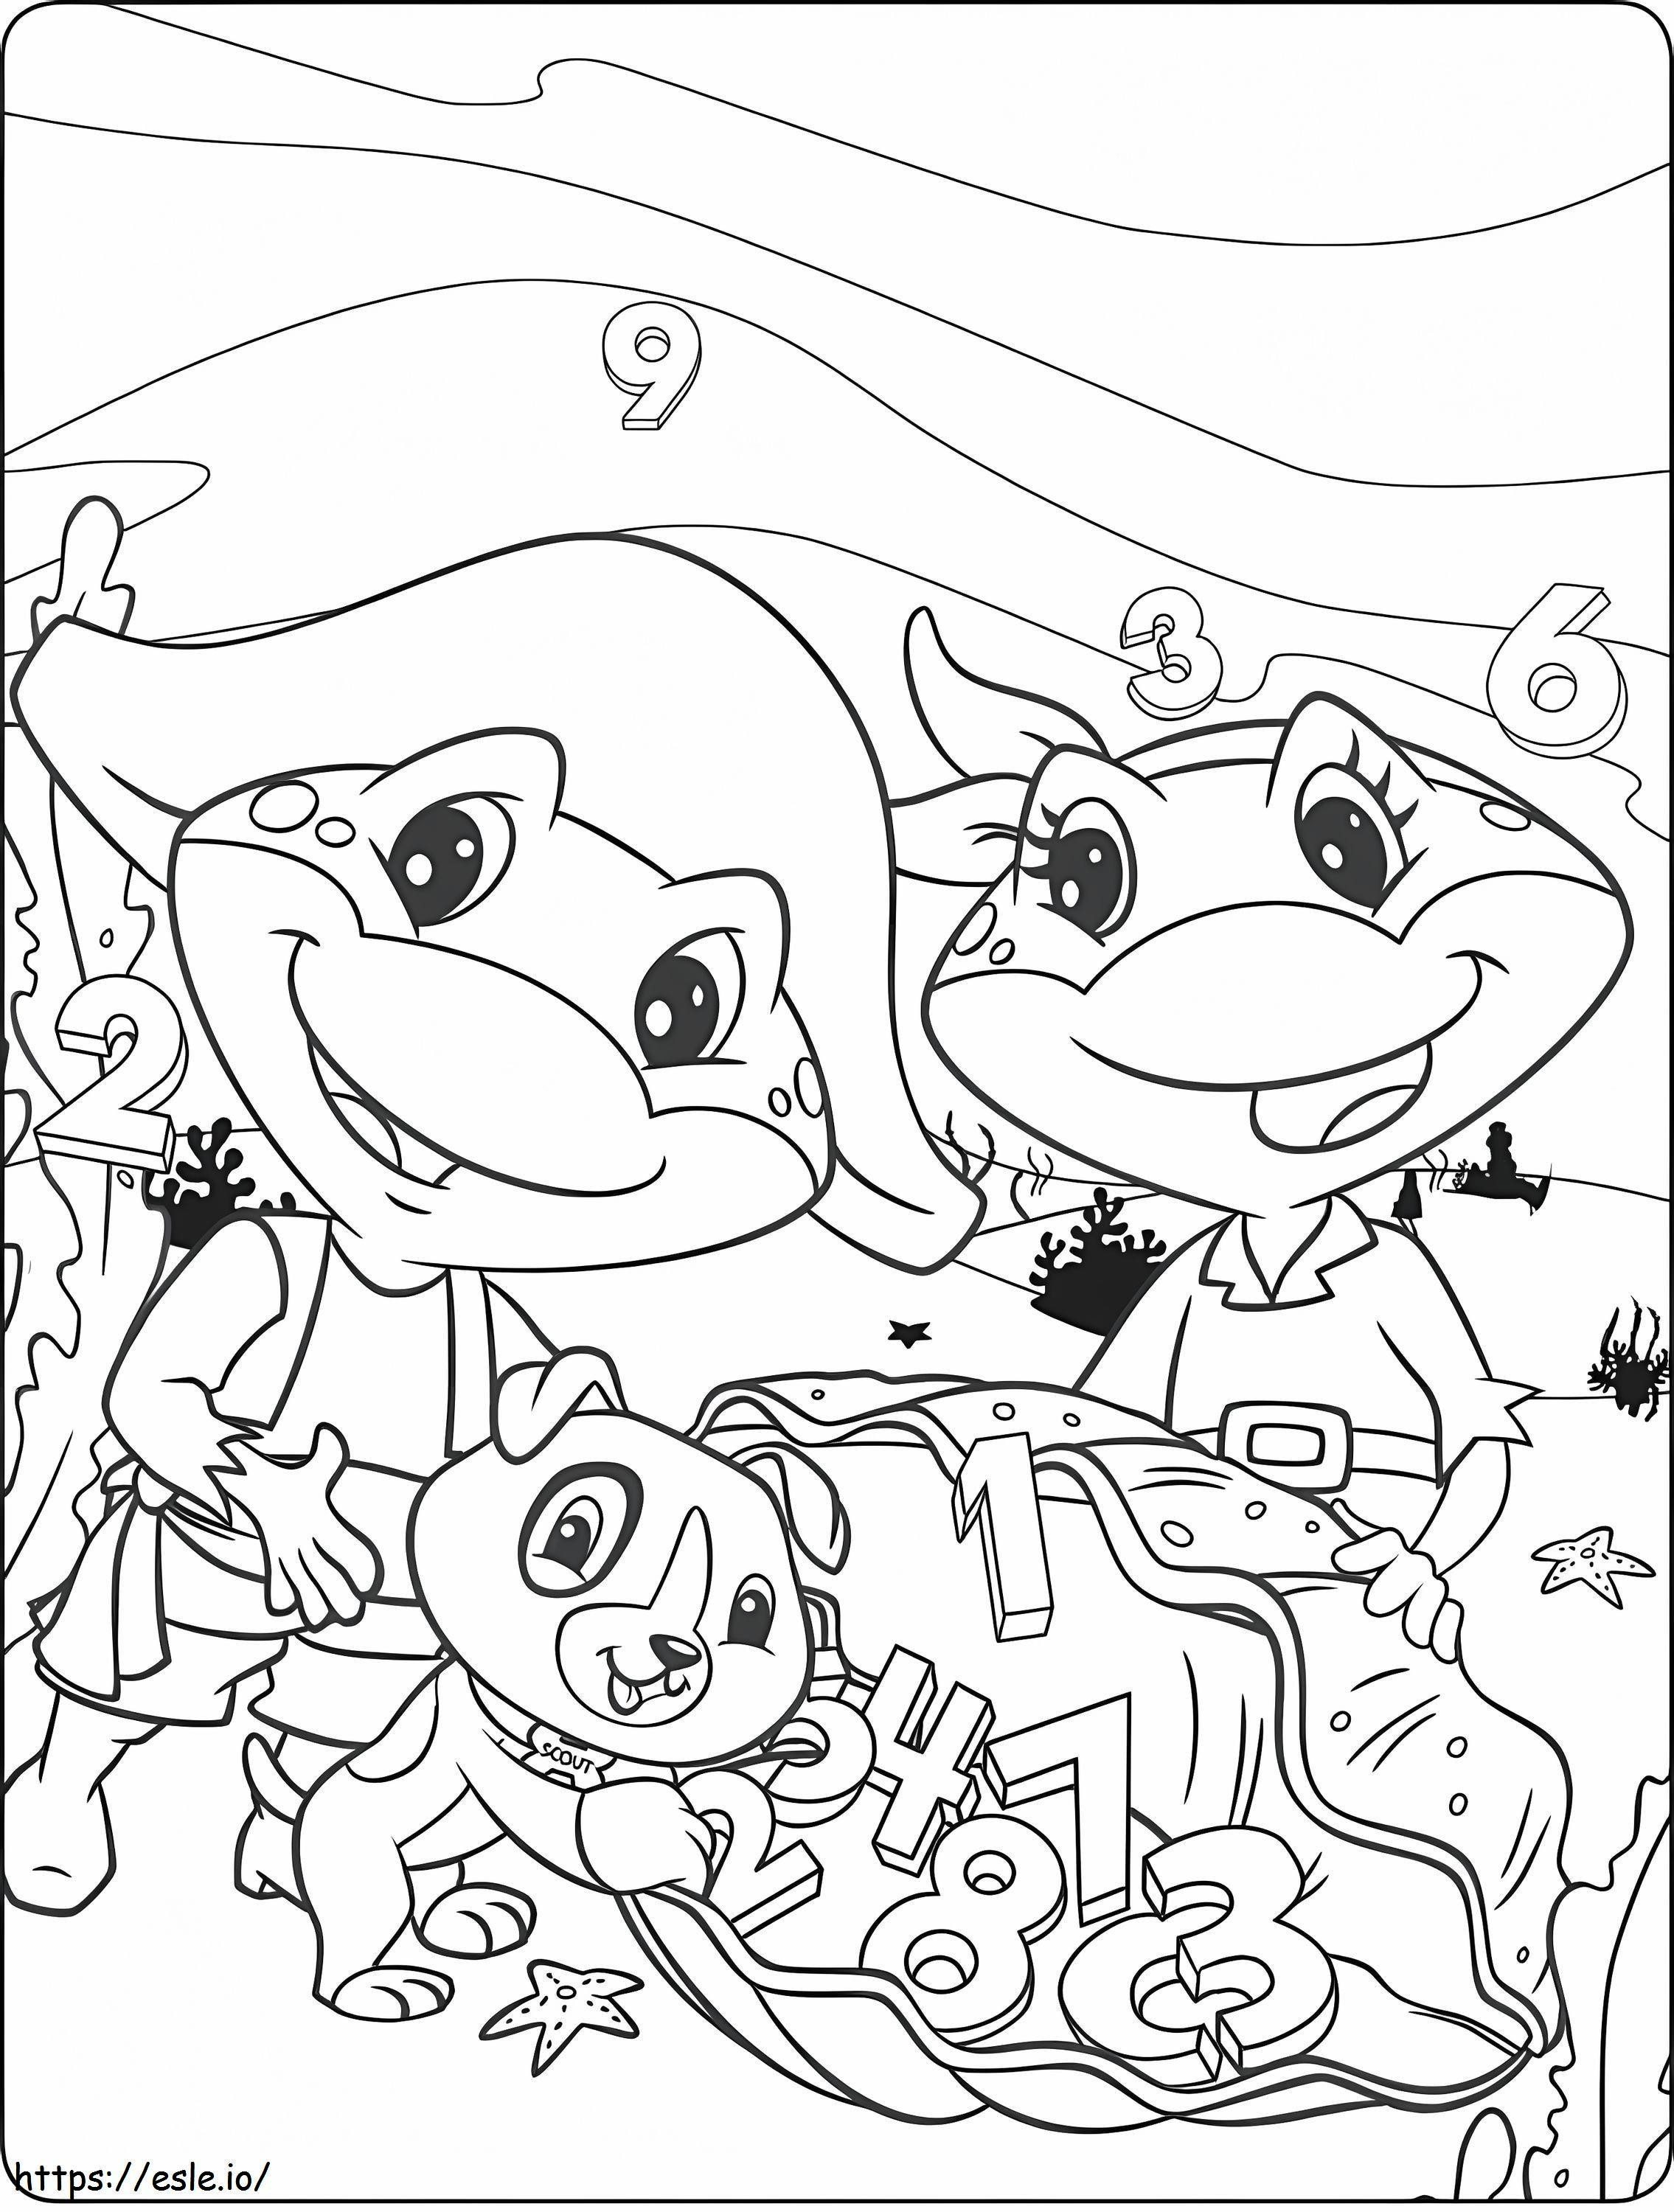 Leapfrog 1 coloring page